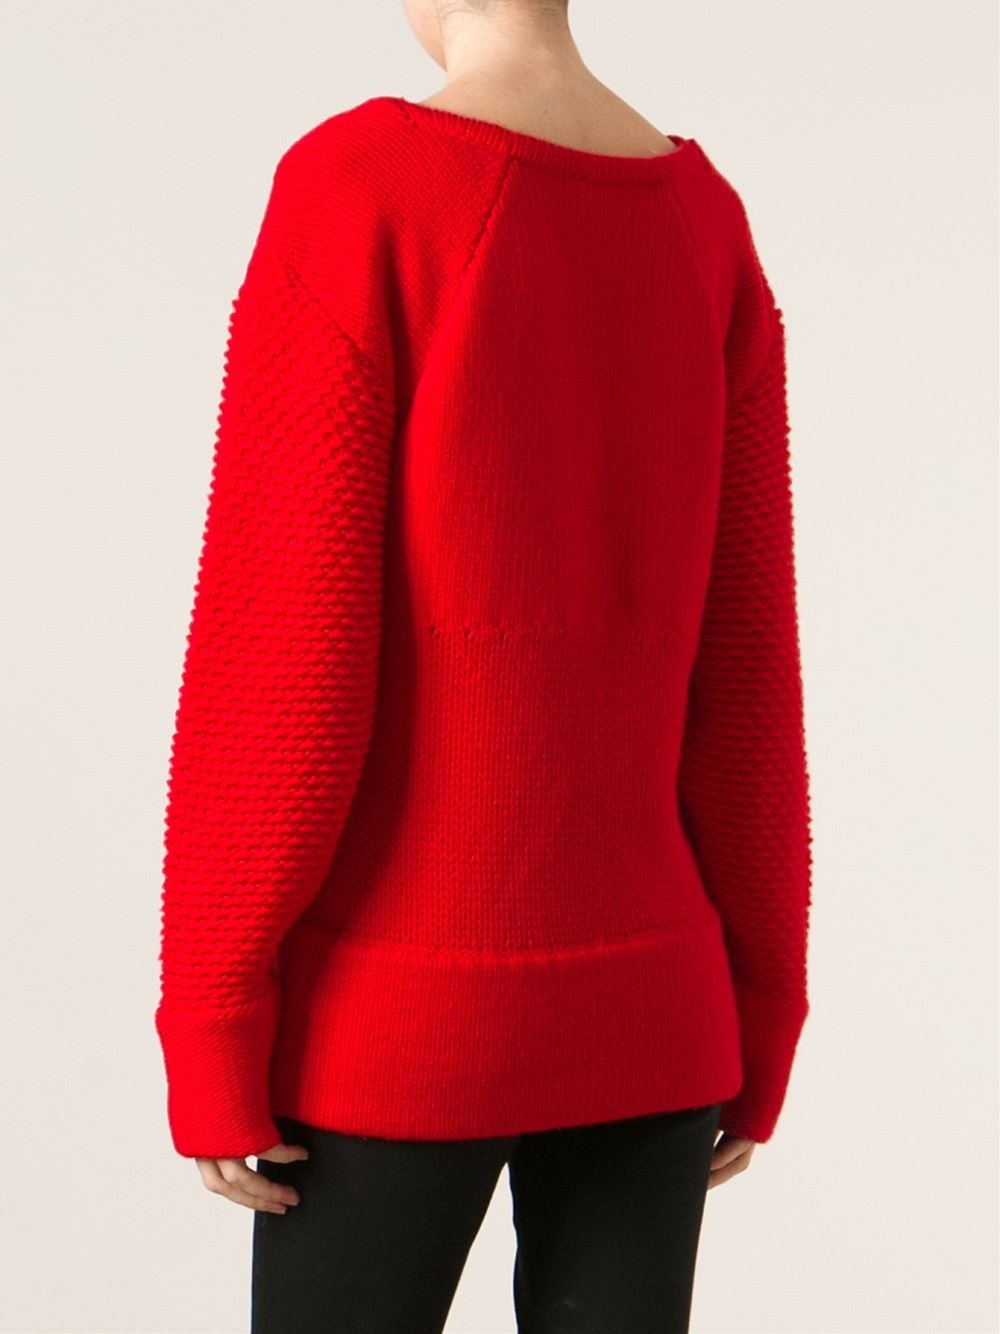 Helmut lang Textured Oversized Sweater in Red | Lyst